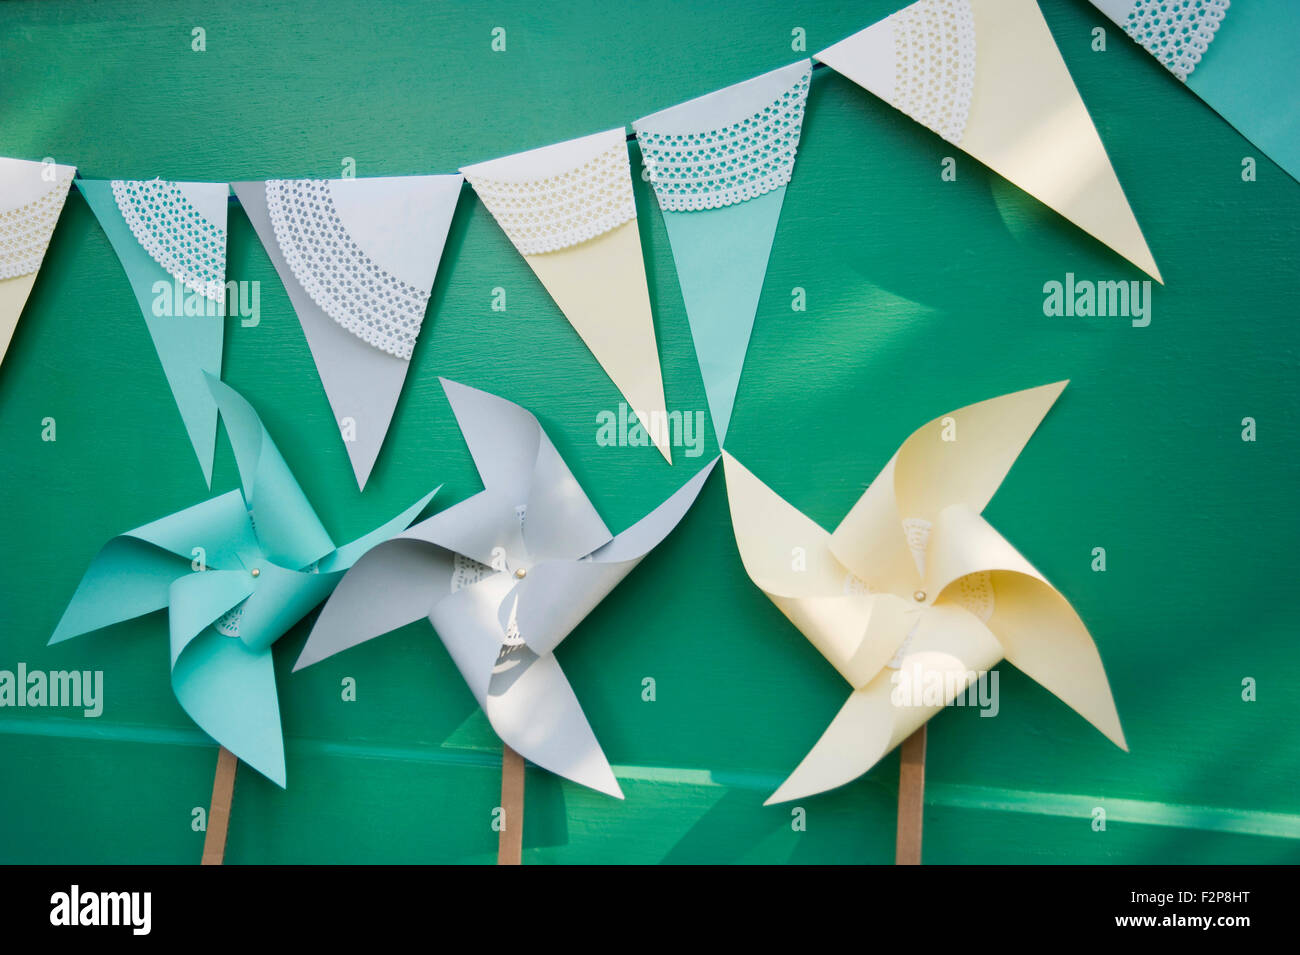 Self-made party decoration, paper windmills and bunting Stock Photo